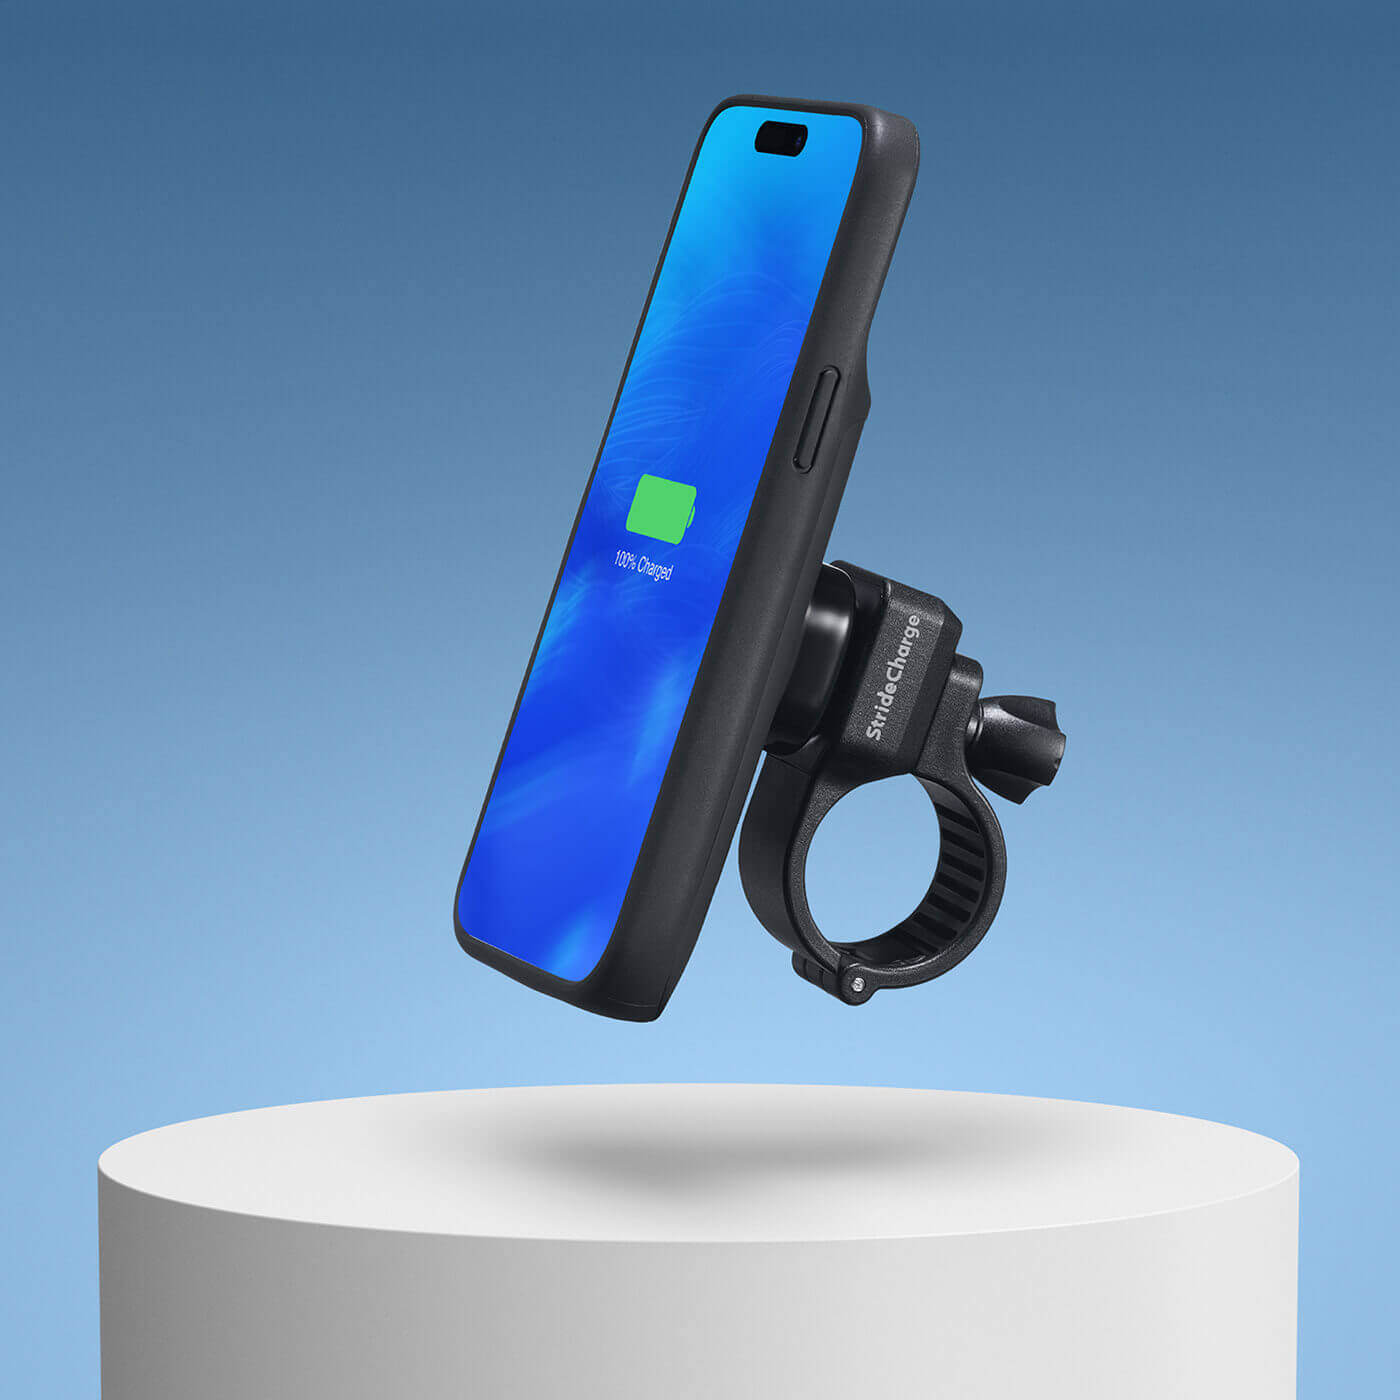 The StrideCharge Mount attached to the Charge Case hovering over a circular table with a blue background